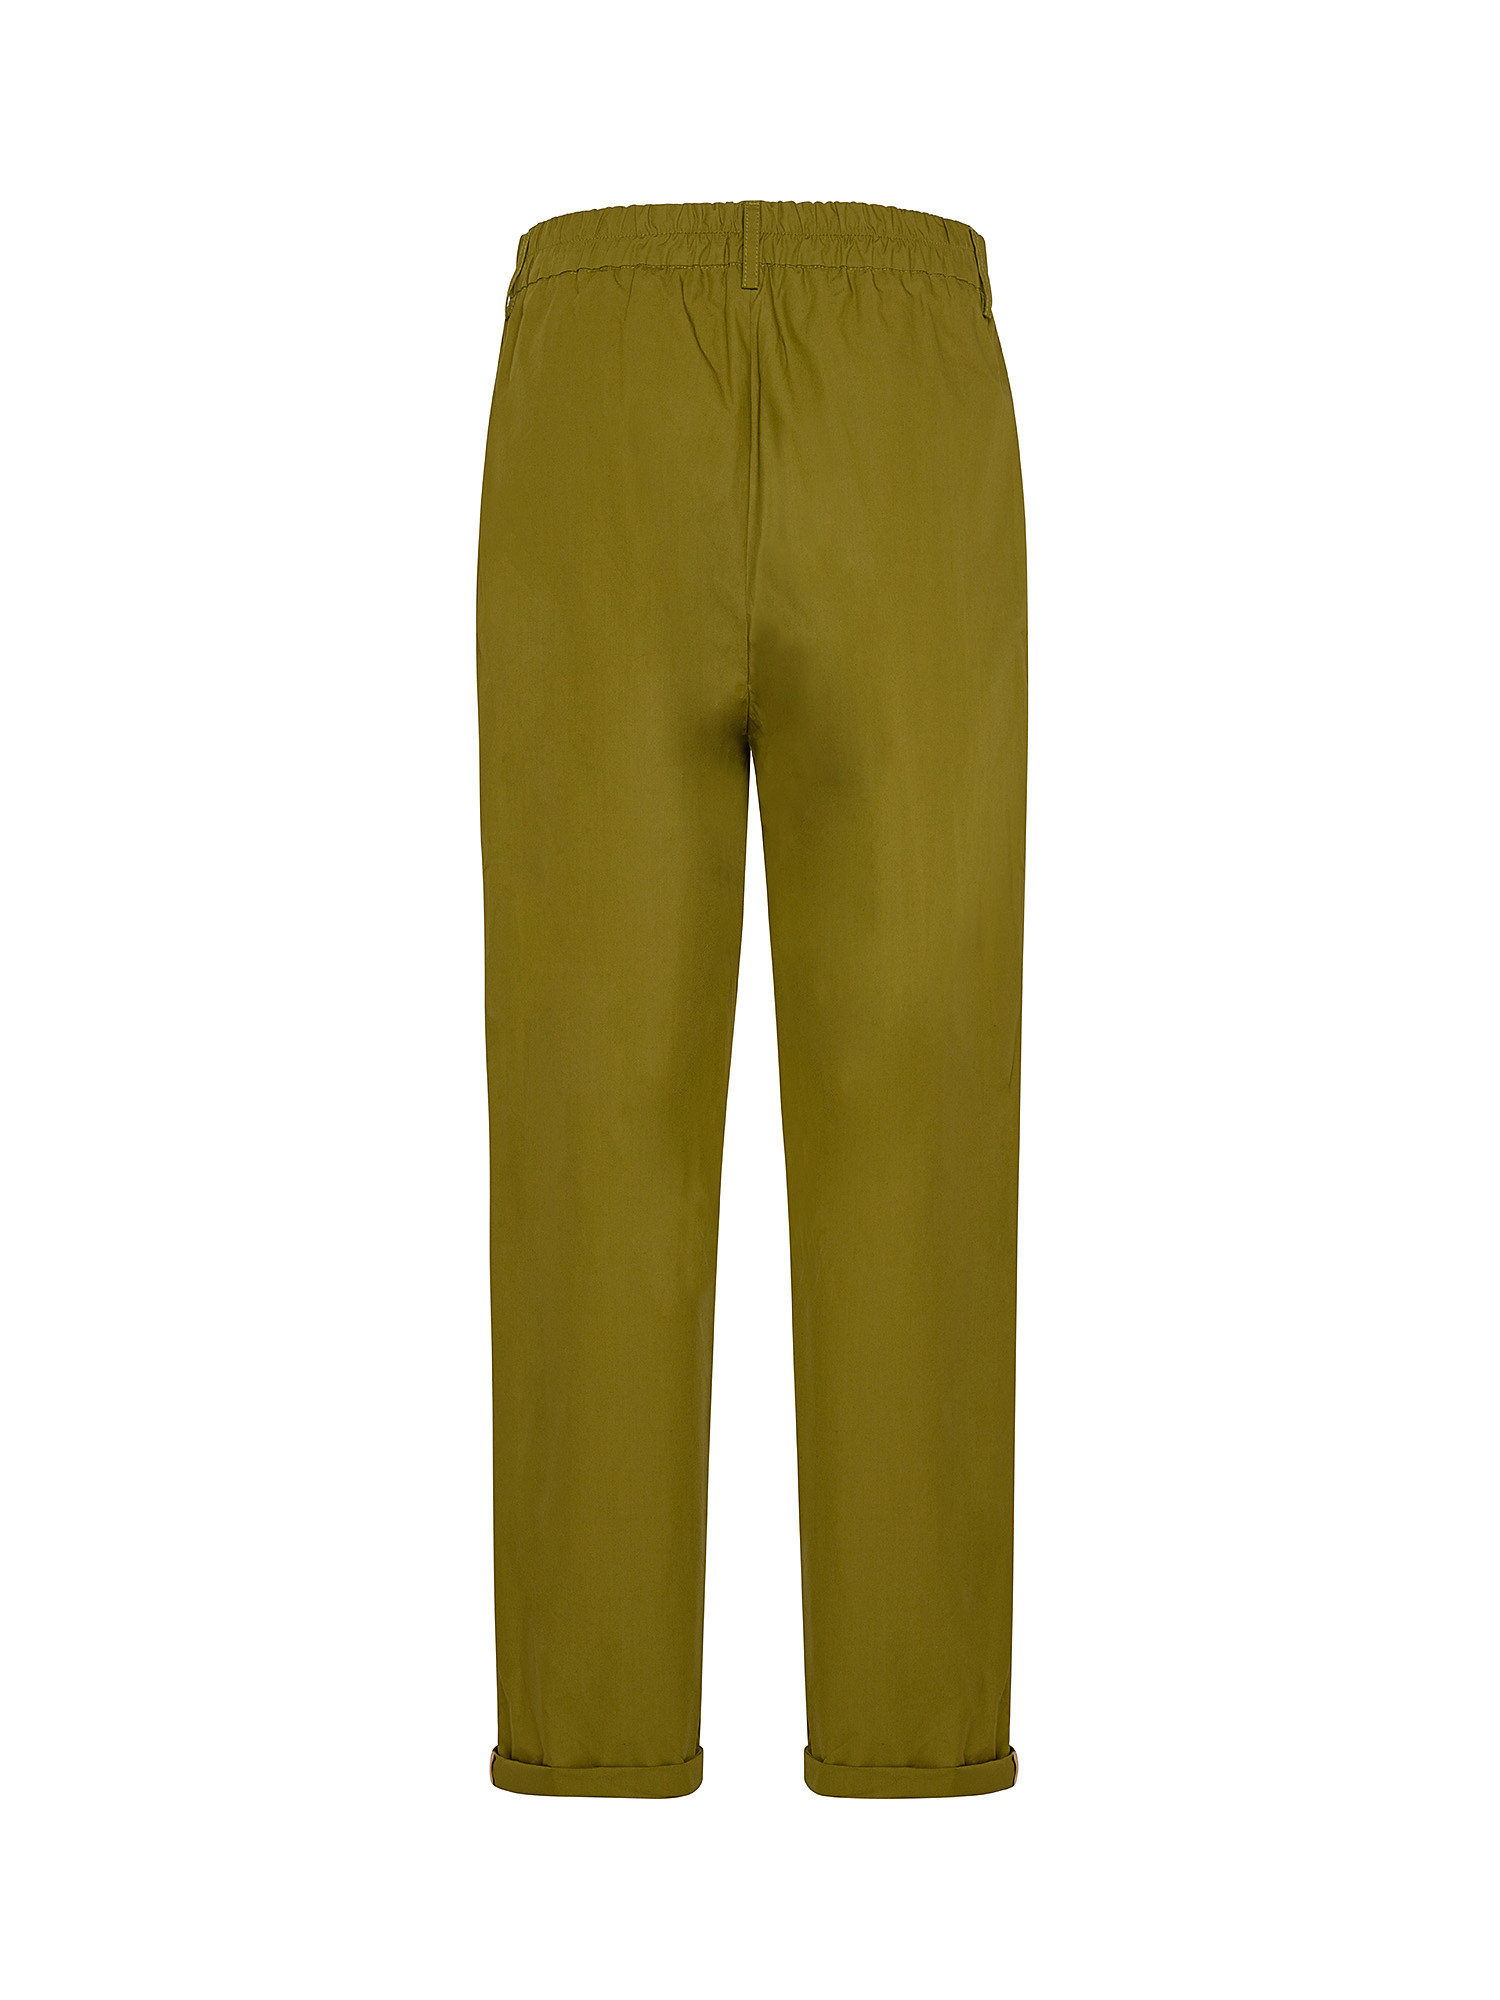 Delaware trousers in cotton poplin, Green, large image number 1